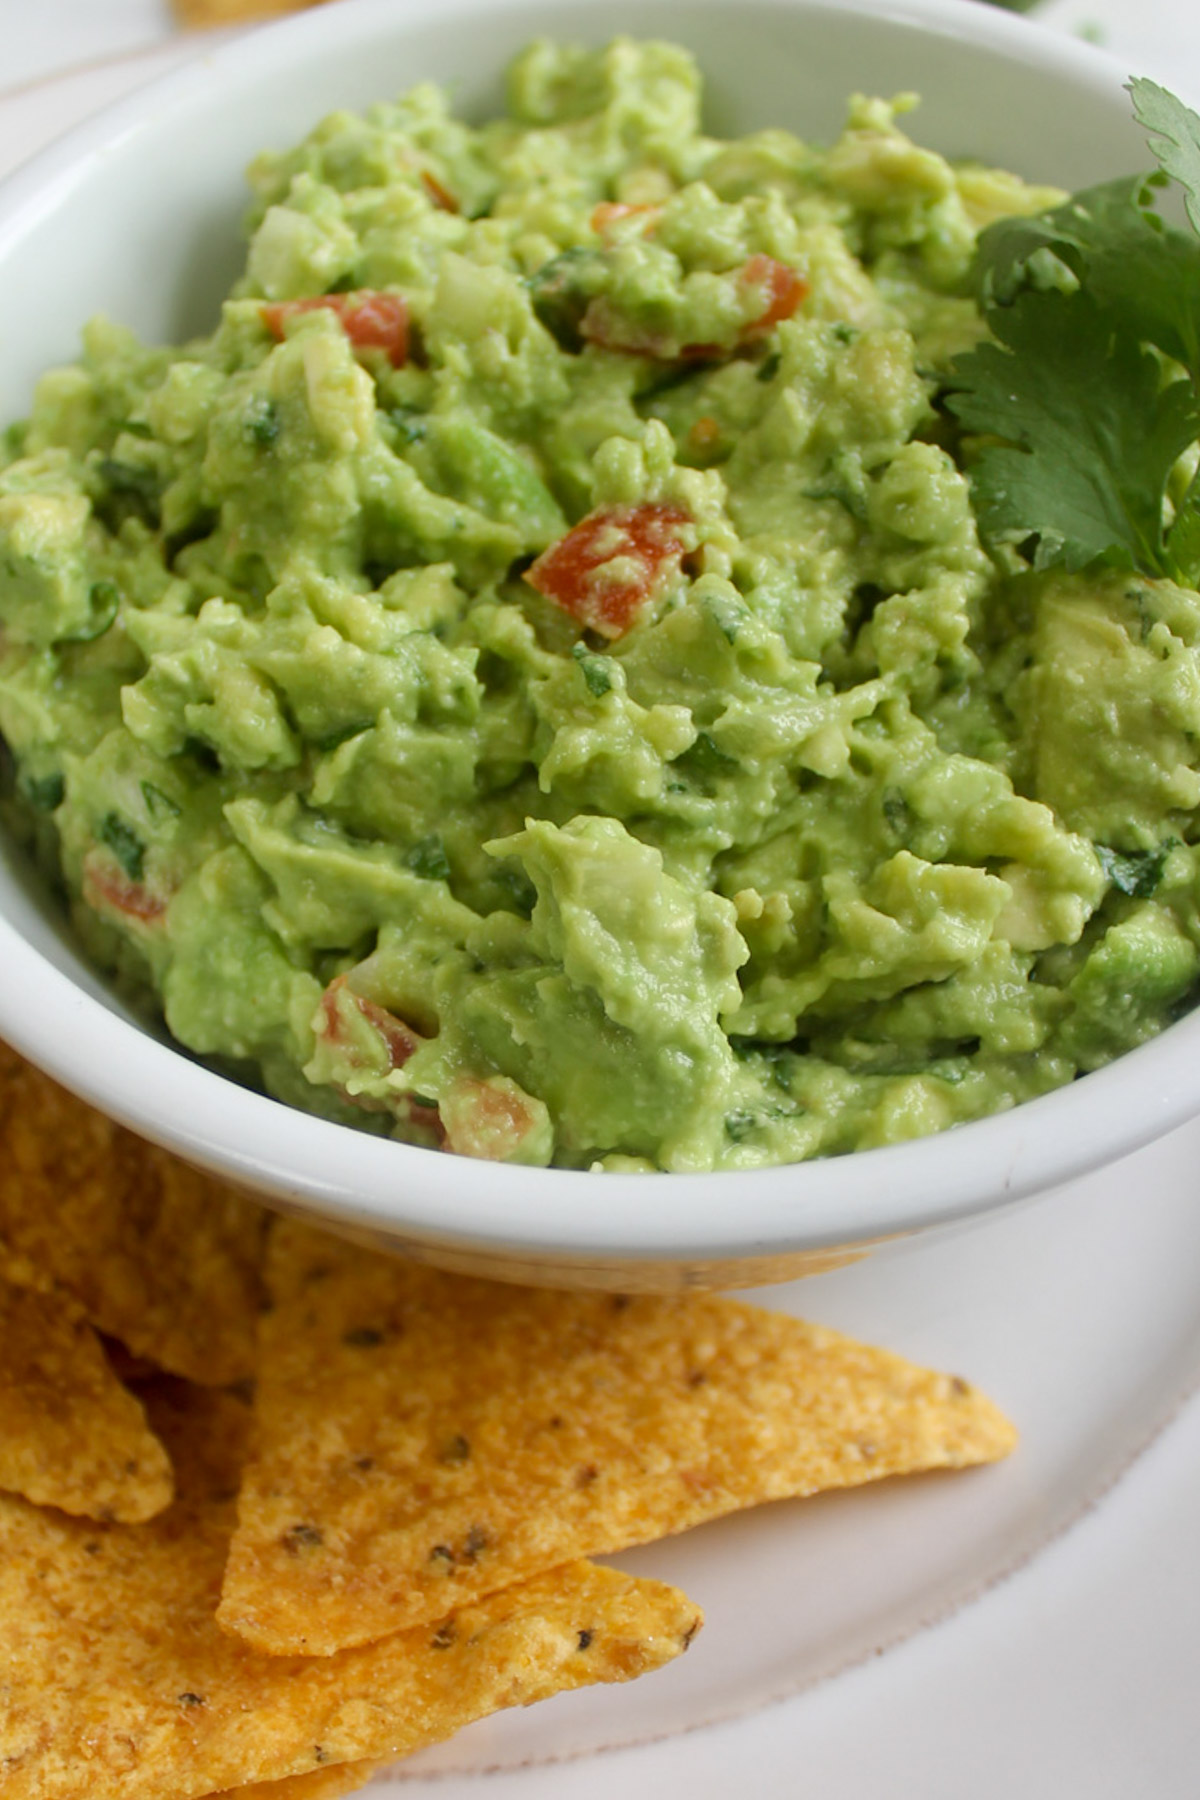 A bowl of guacamole with corn tortilla chips.